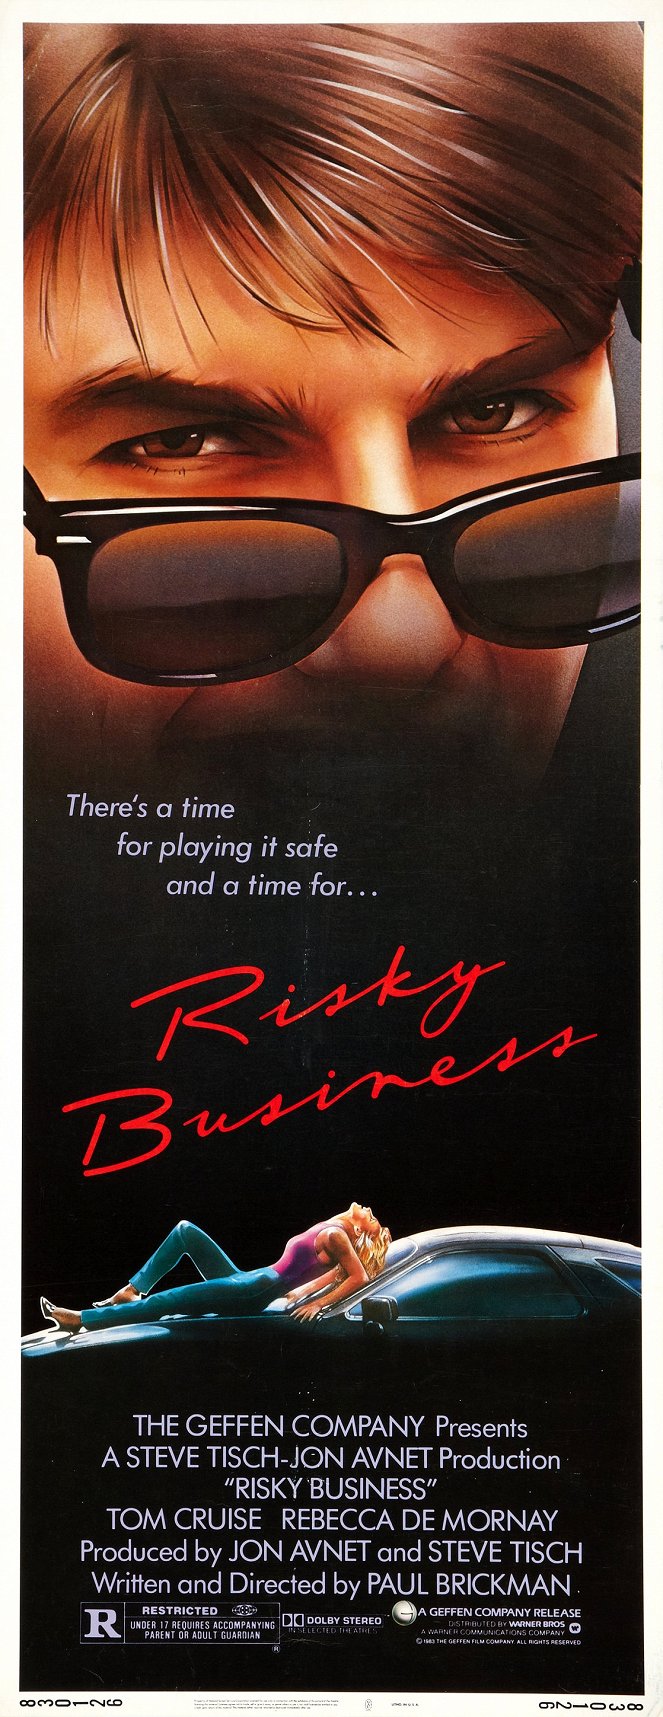 Risky Business - Posters